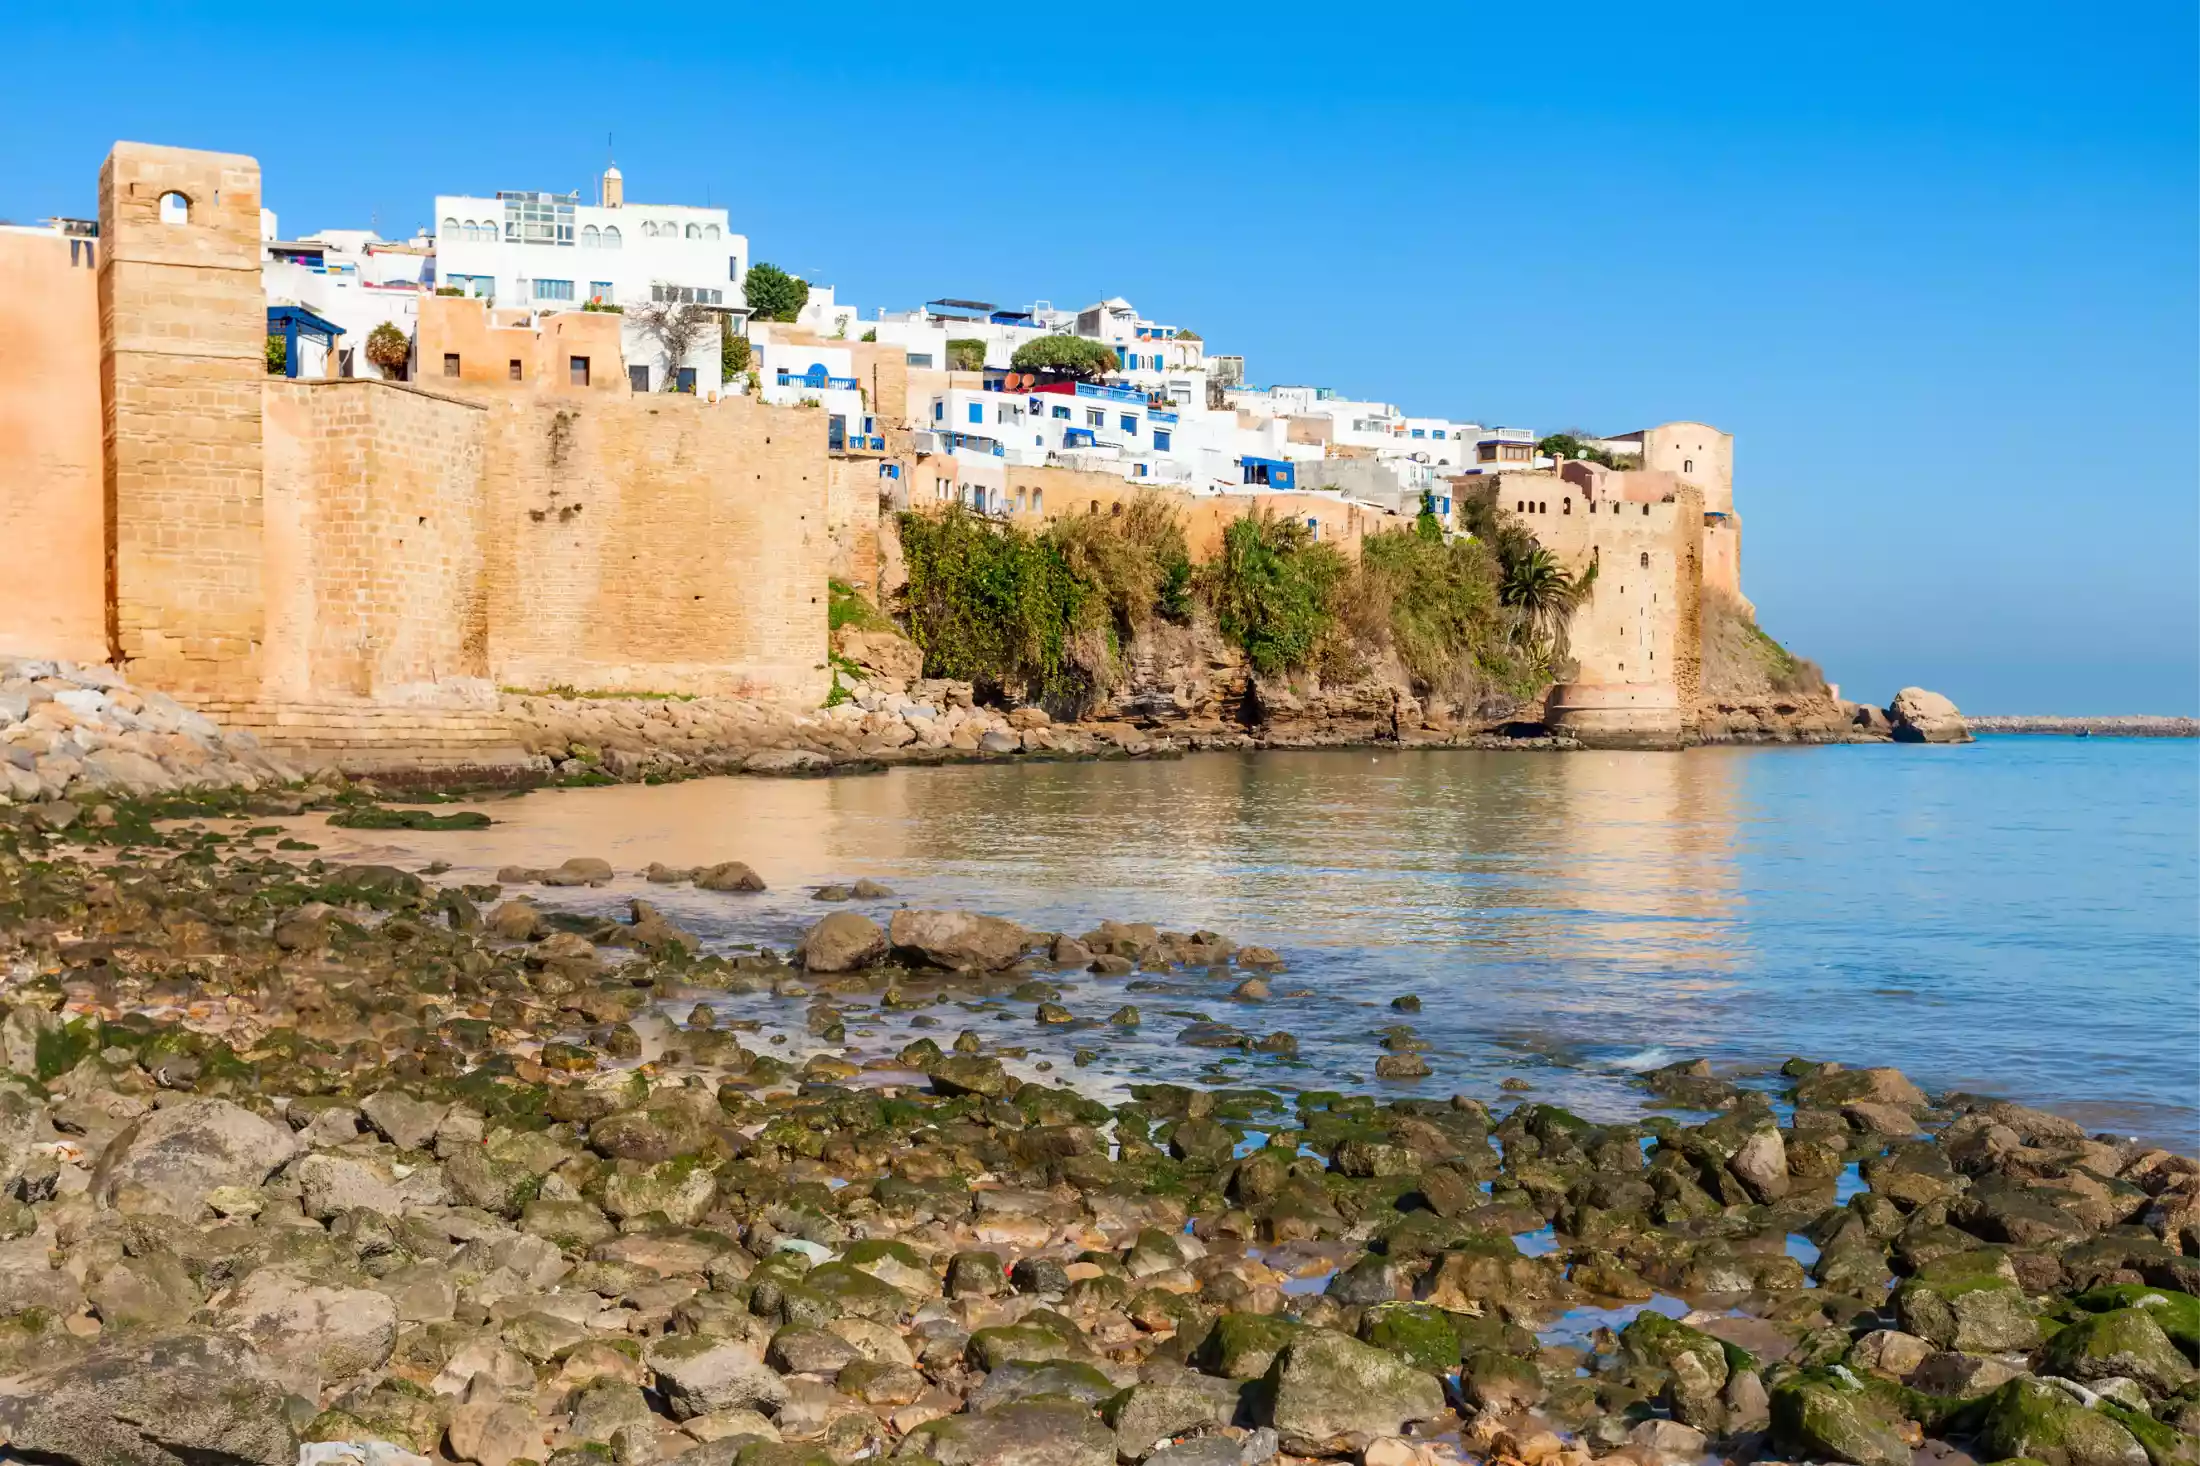 The Kasbah of the Udayas fortress in Rabat in Morocco.